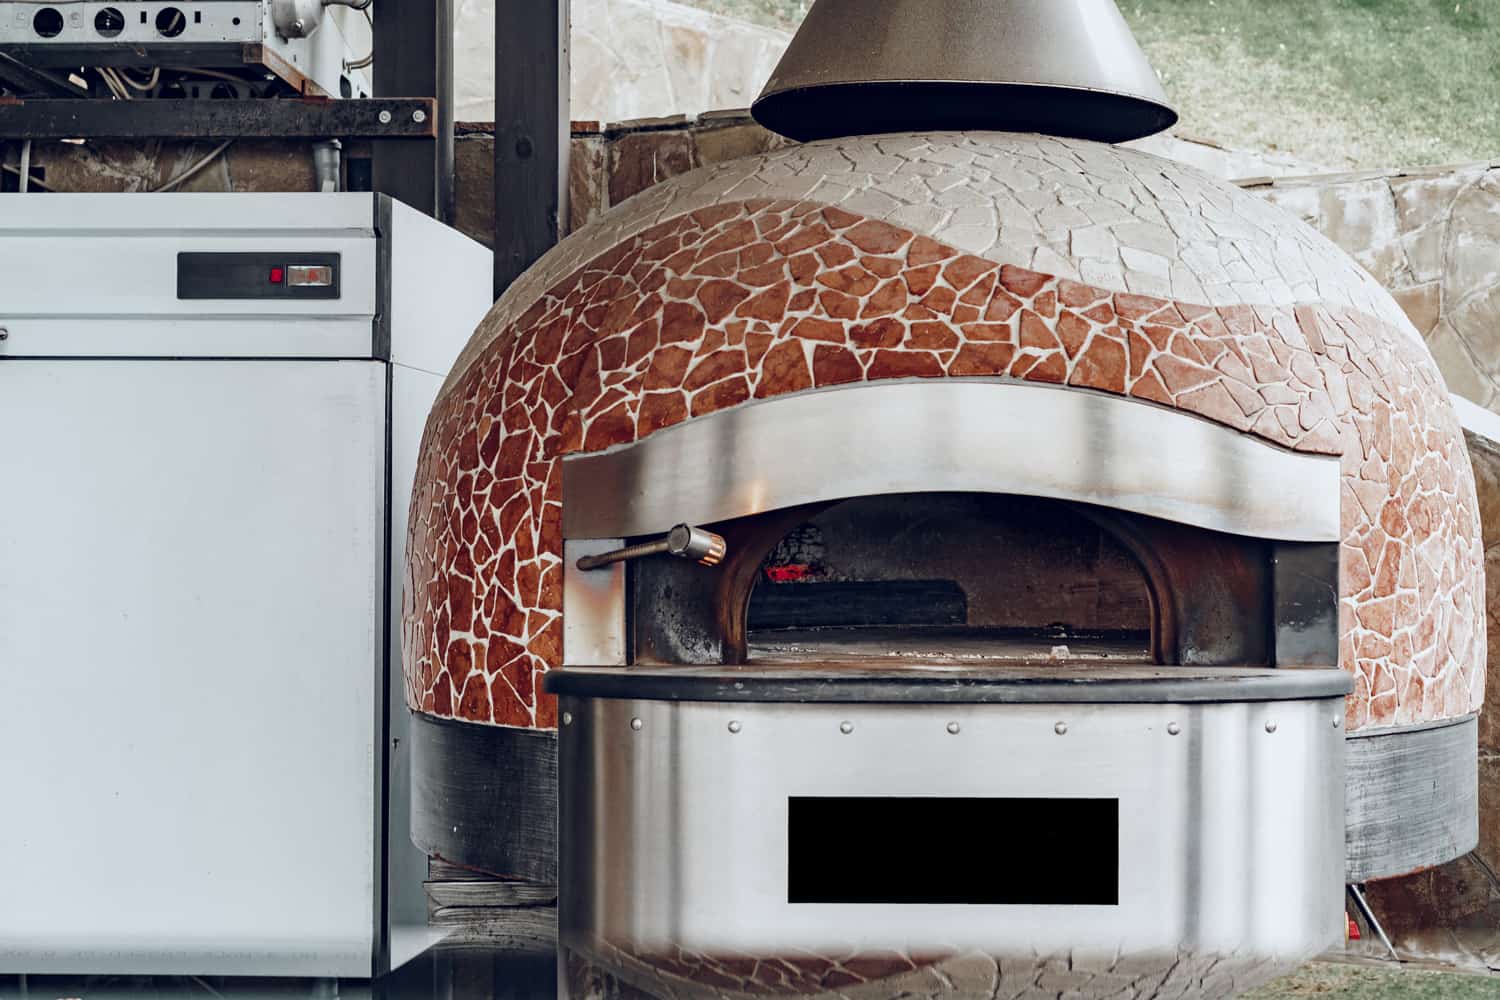 Outdoor pizza oven with mosaic decoratiion in a restaurant